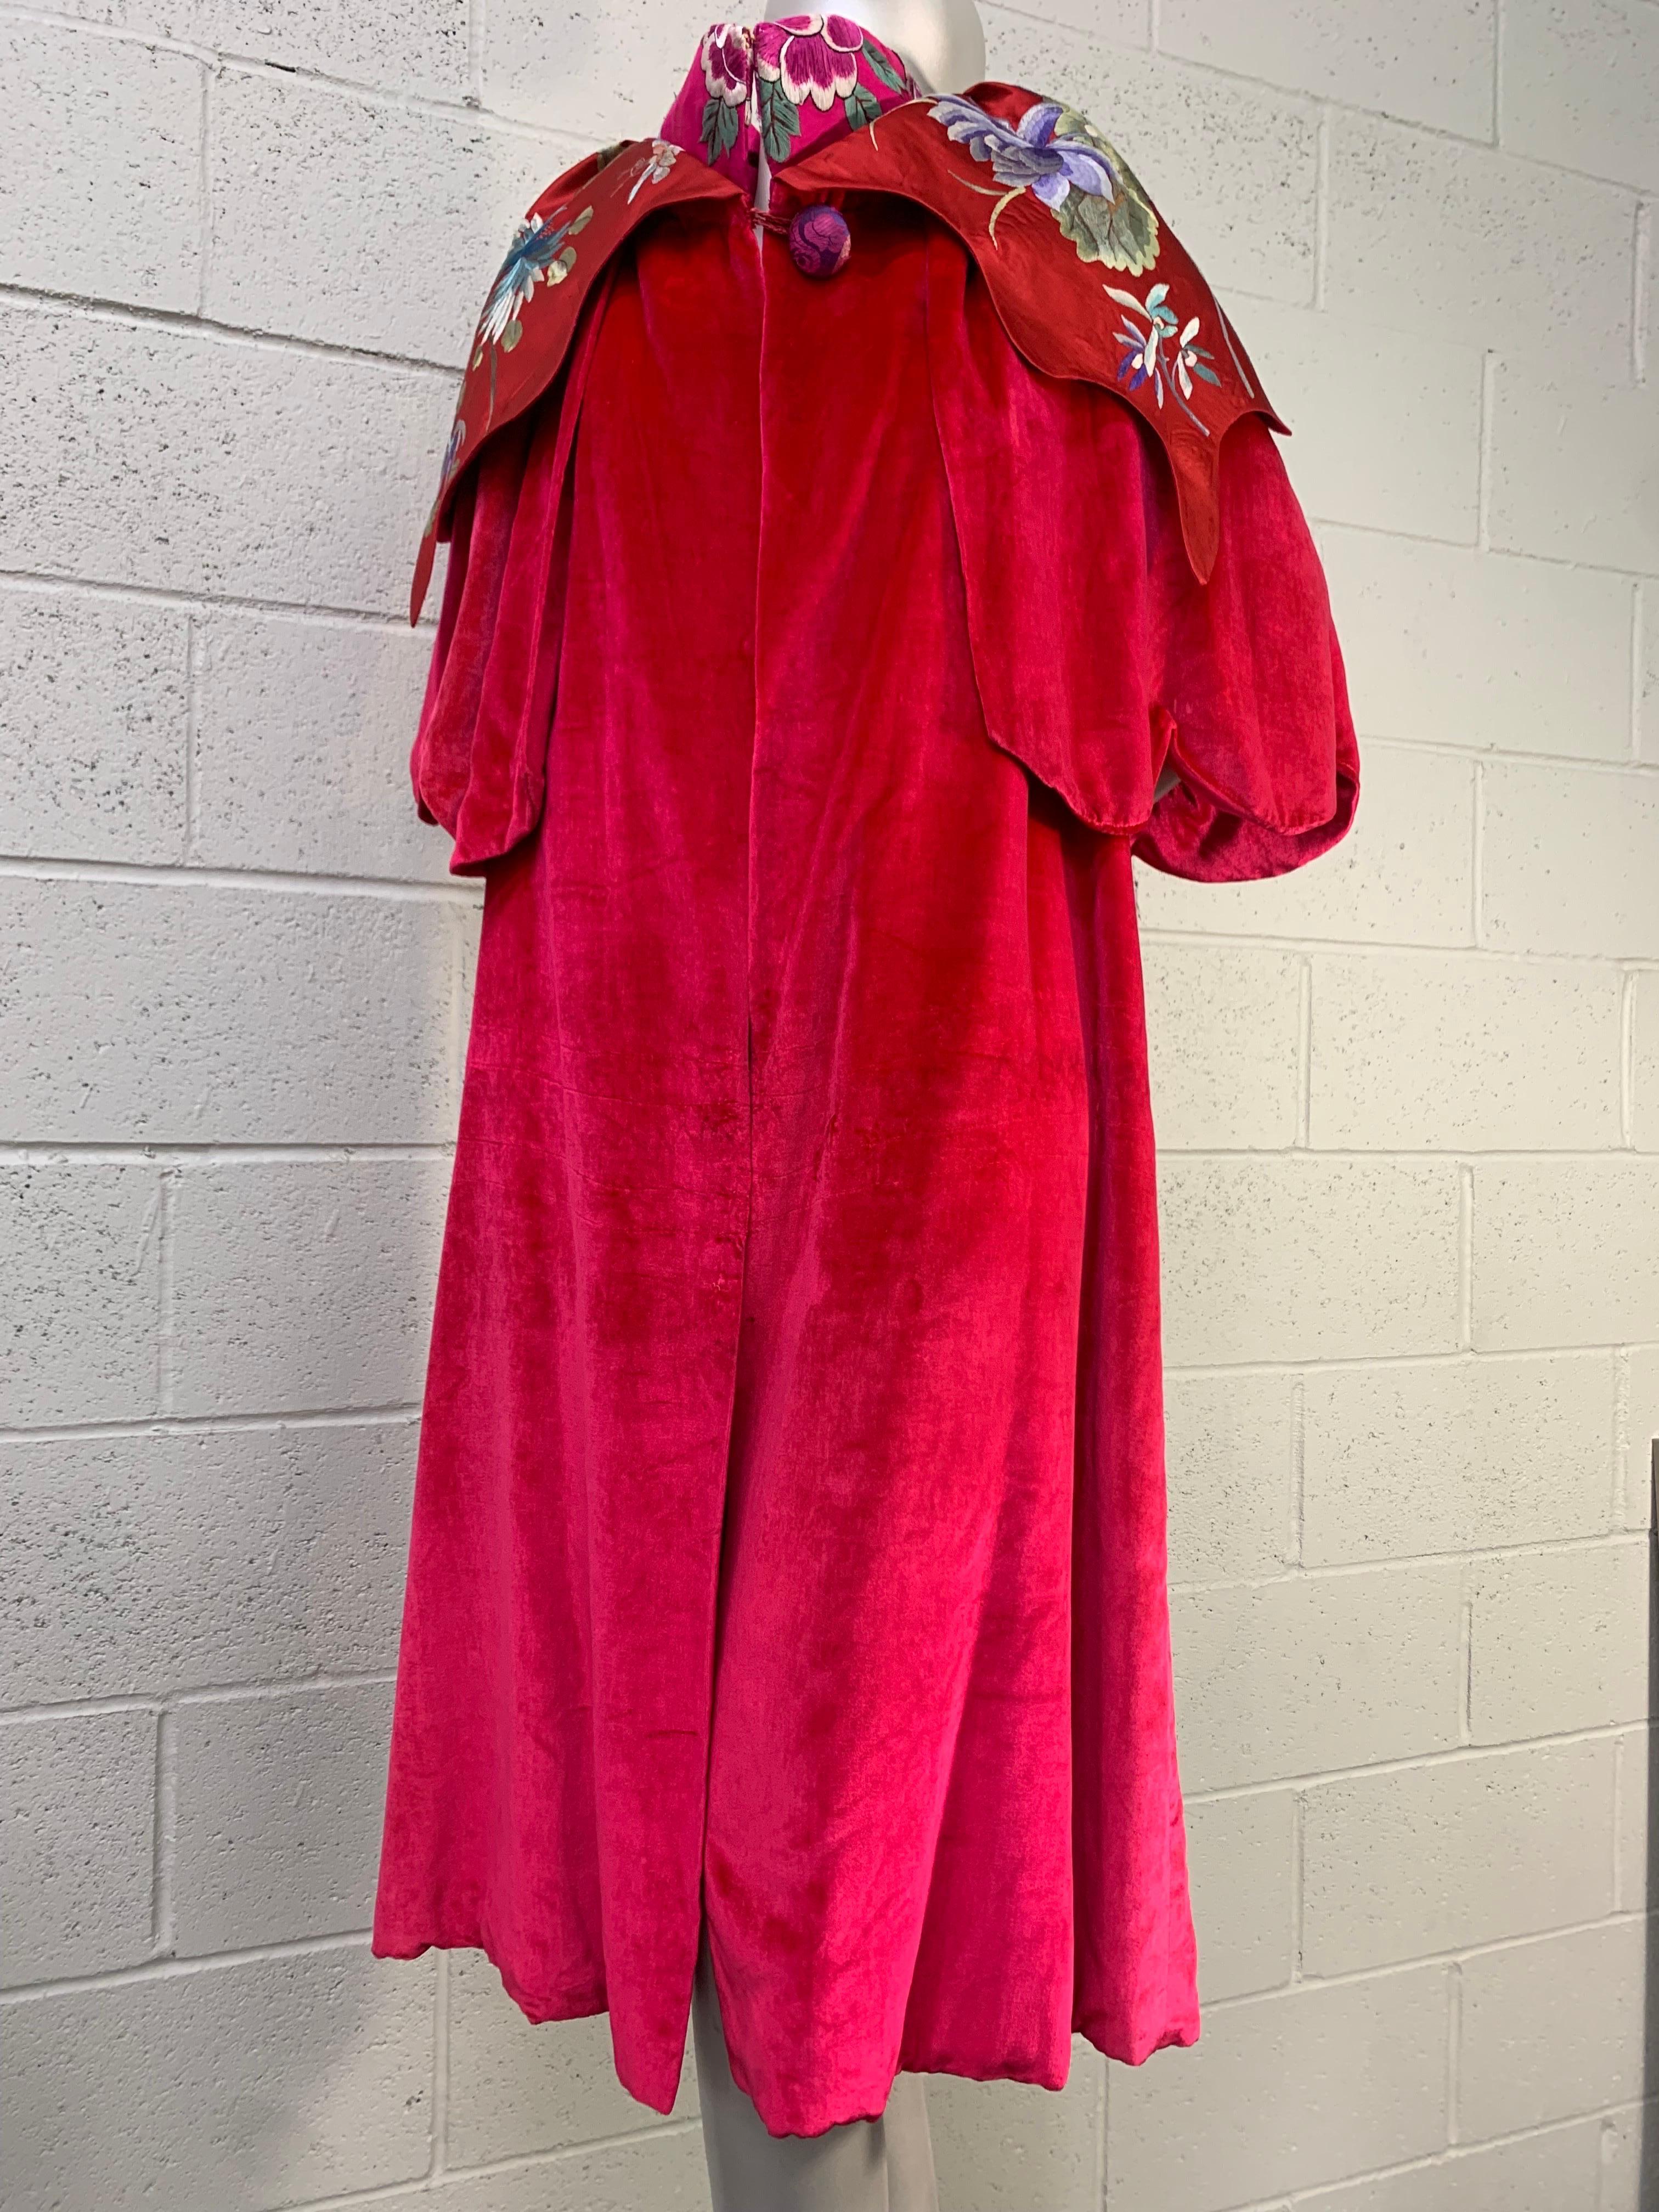 Torso Creations 1920s Shocking Pink Silk Panne Velvet Cape w Embroidered Collar In Excellent Condition For Sale In Gresham, OR